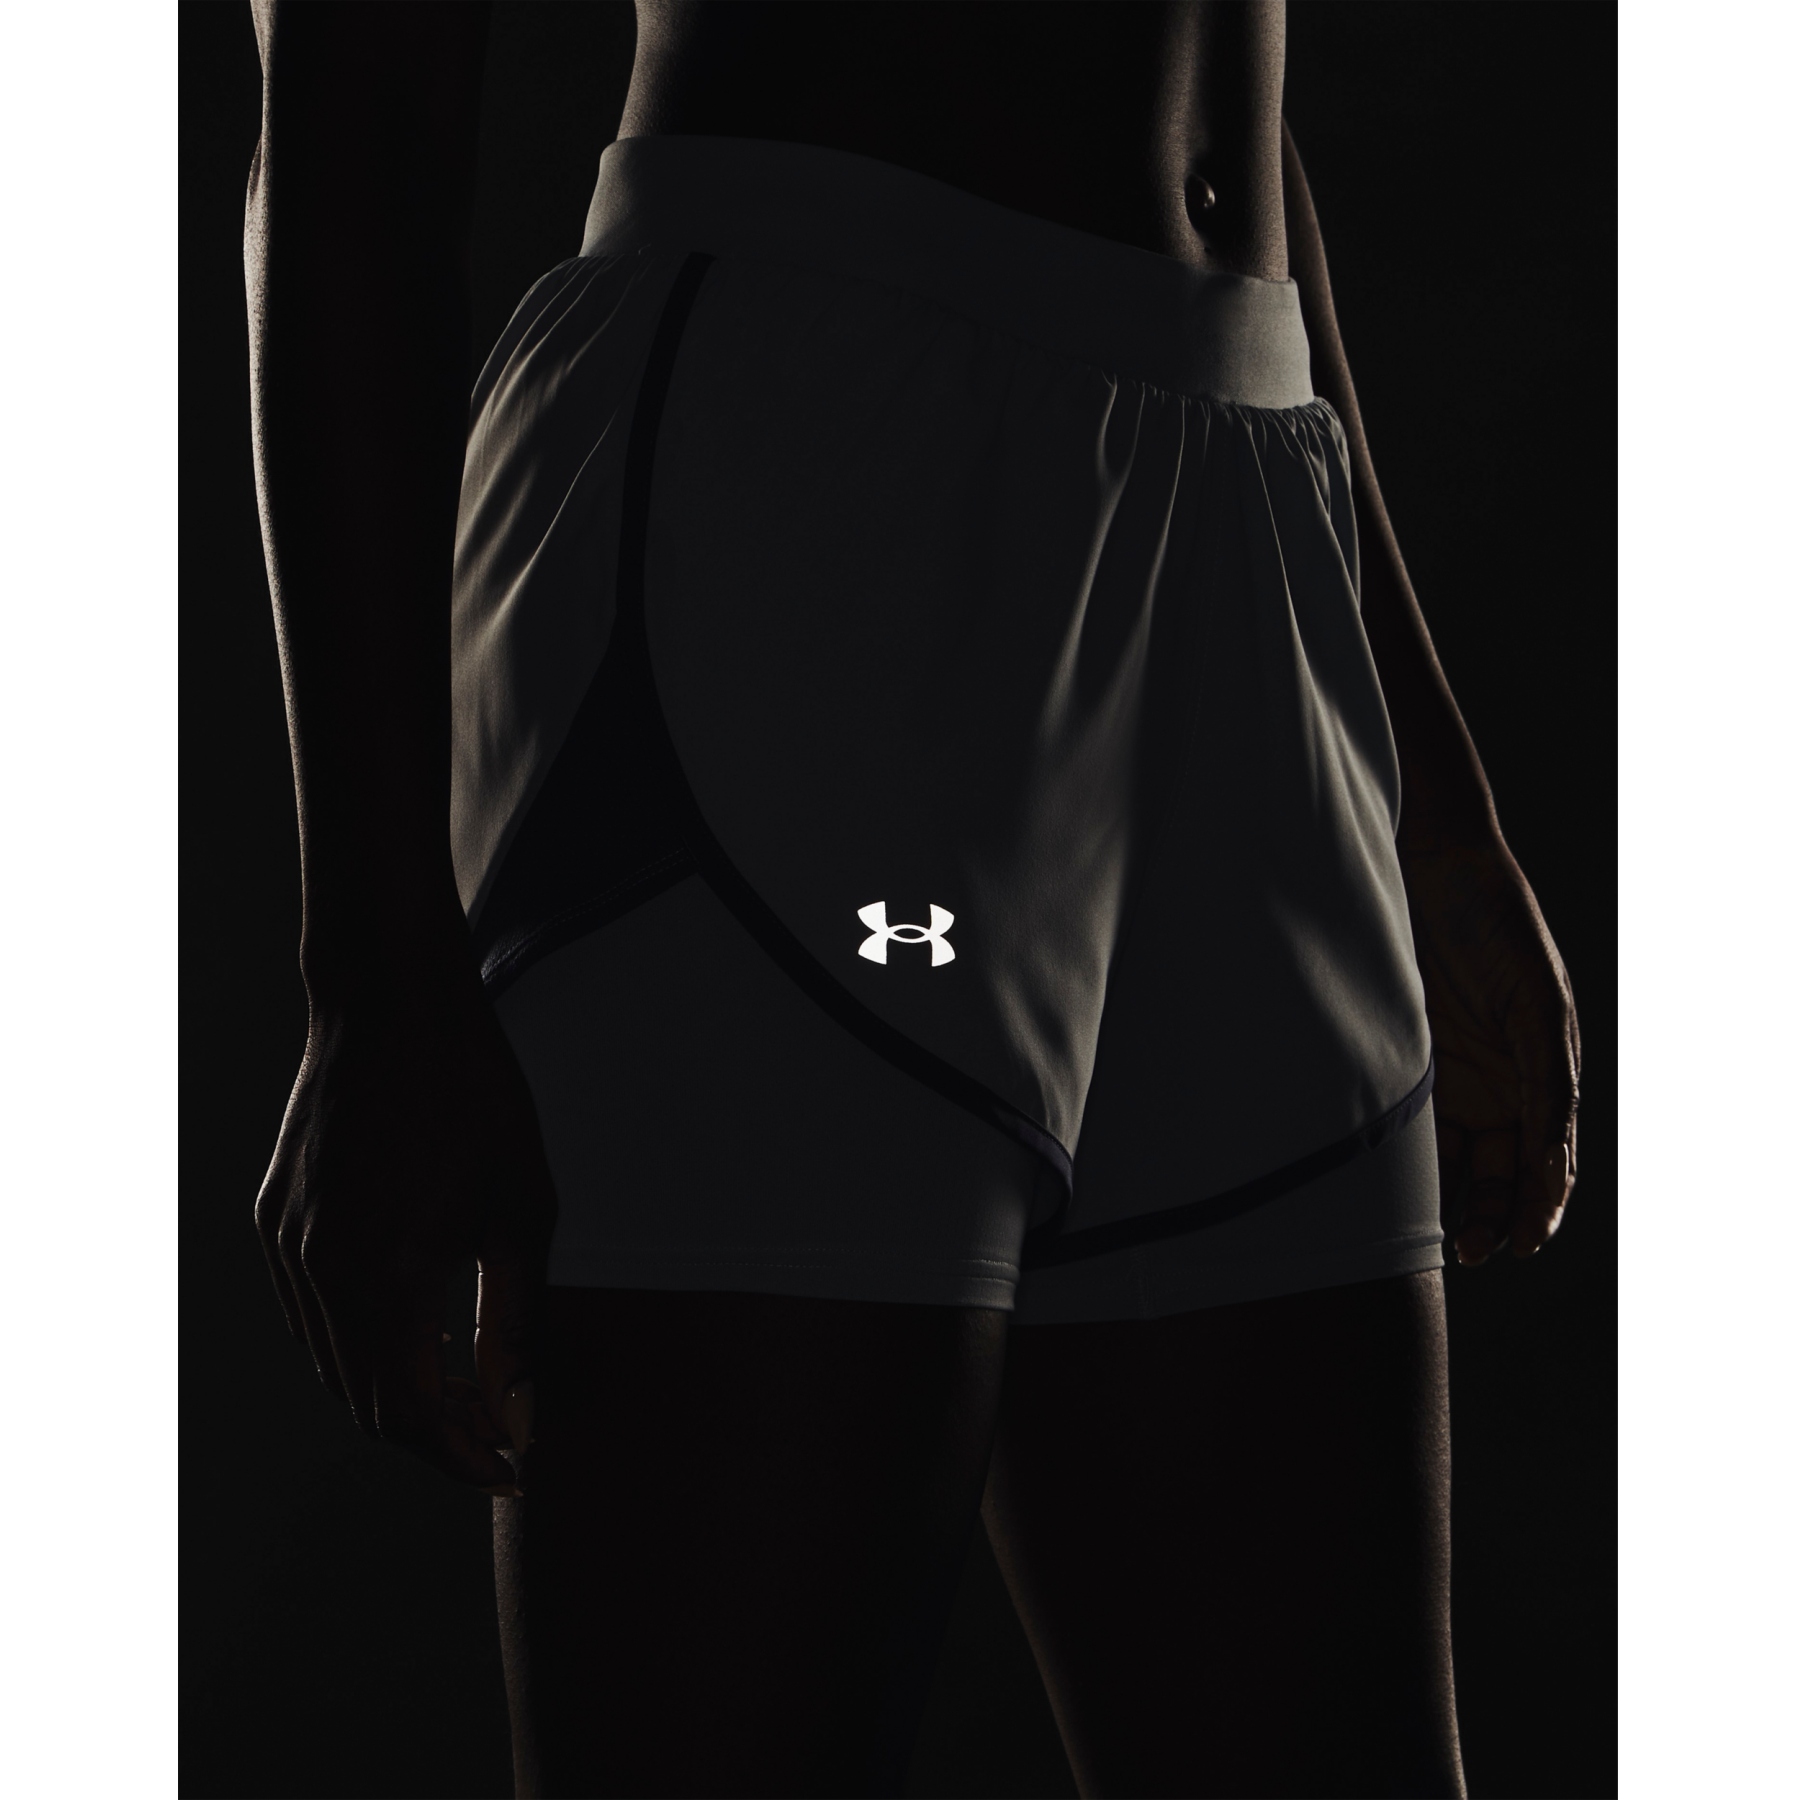 https://images.bike24.com/i/mb/6c/a3/a1/under-armour-womens-ua-fly-by-elite-2-in-1-shorts-harbor-blue-reflective-7-1334665.jpg